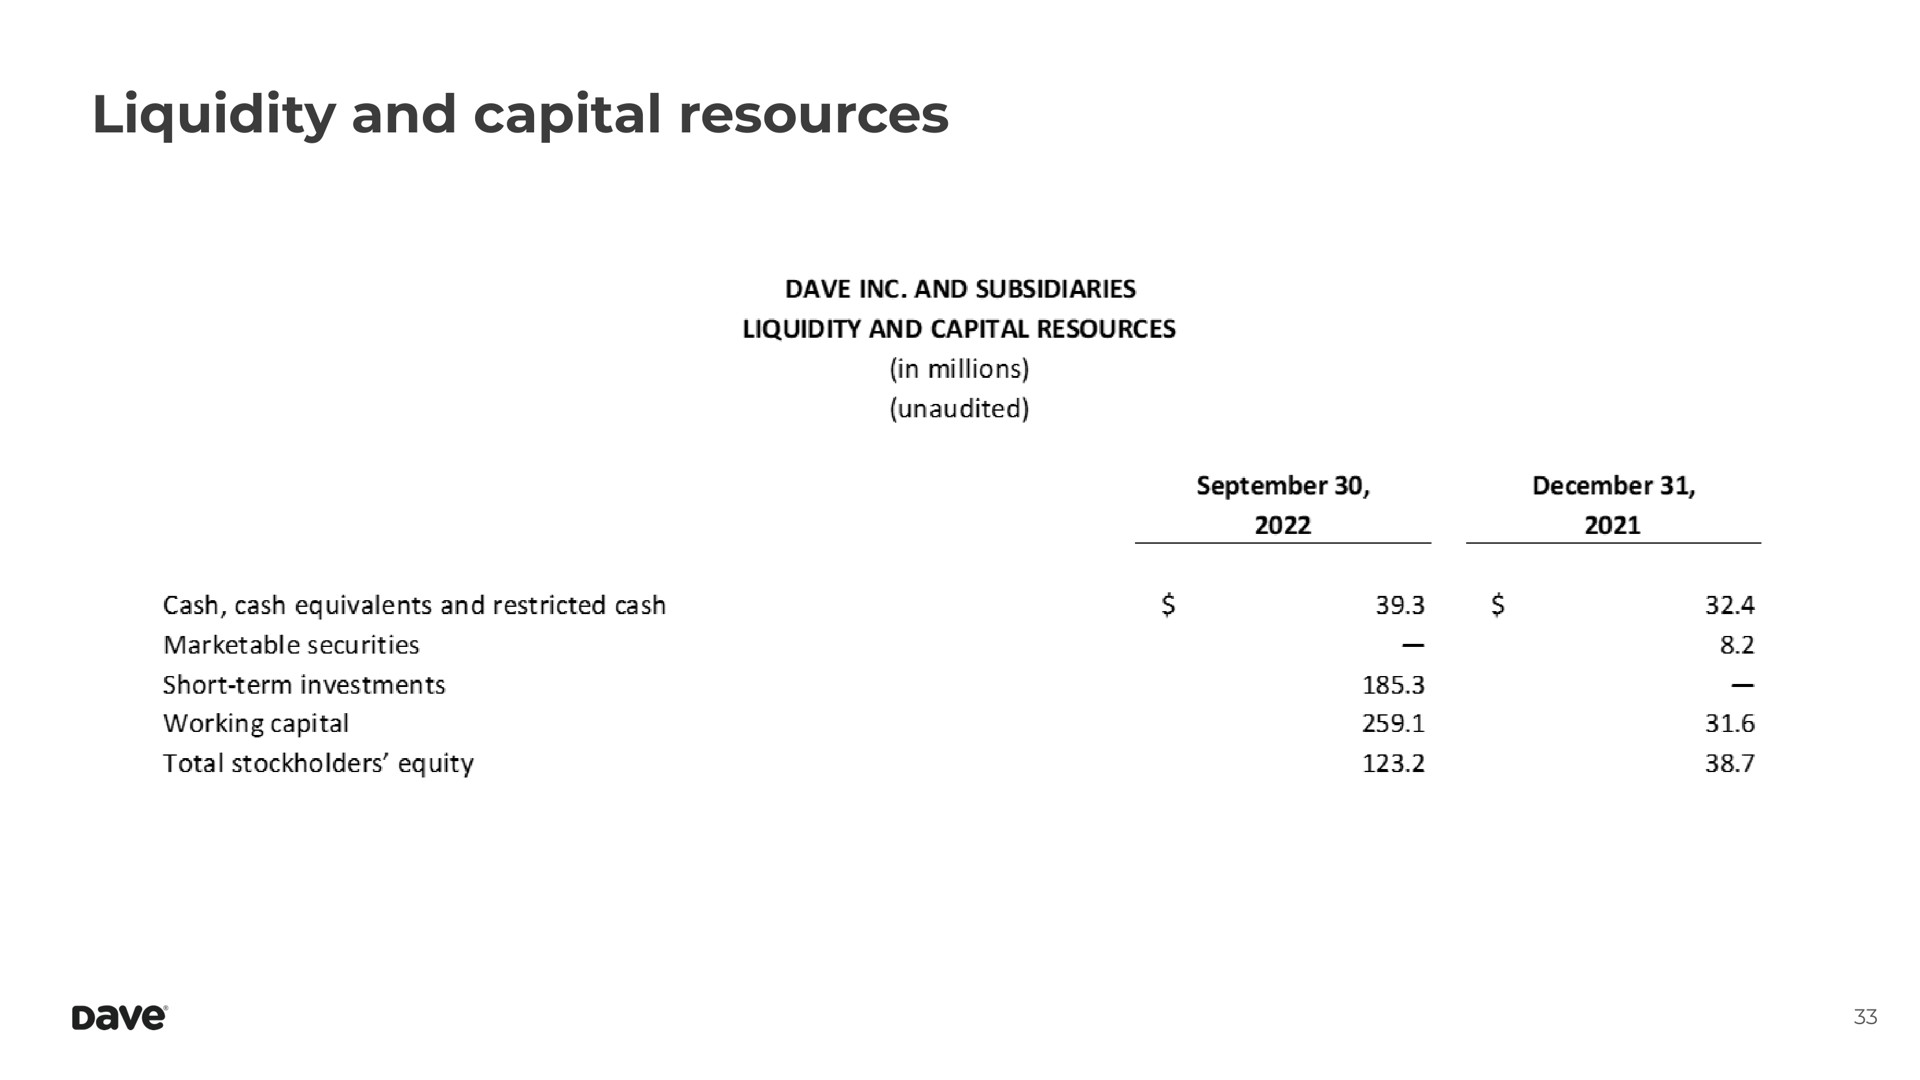 liquidity and capital resources | Dave